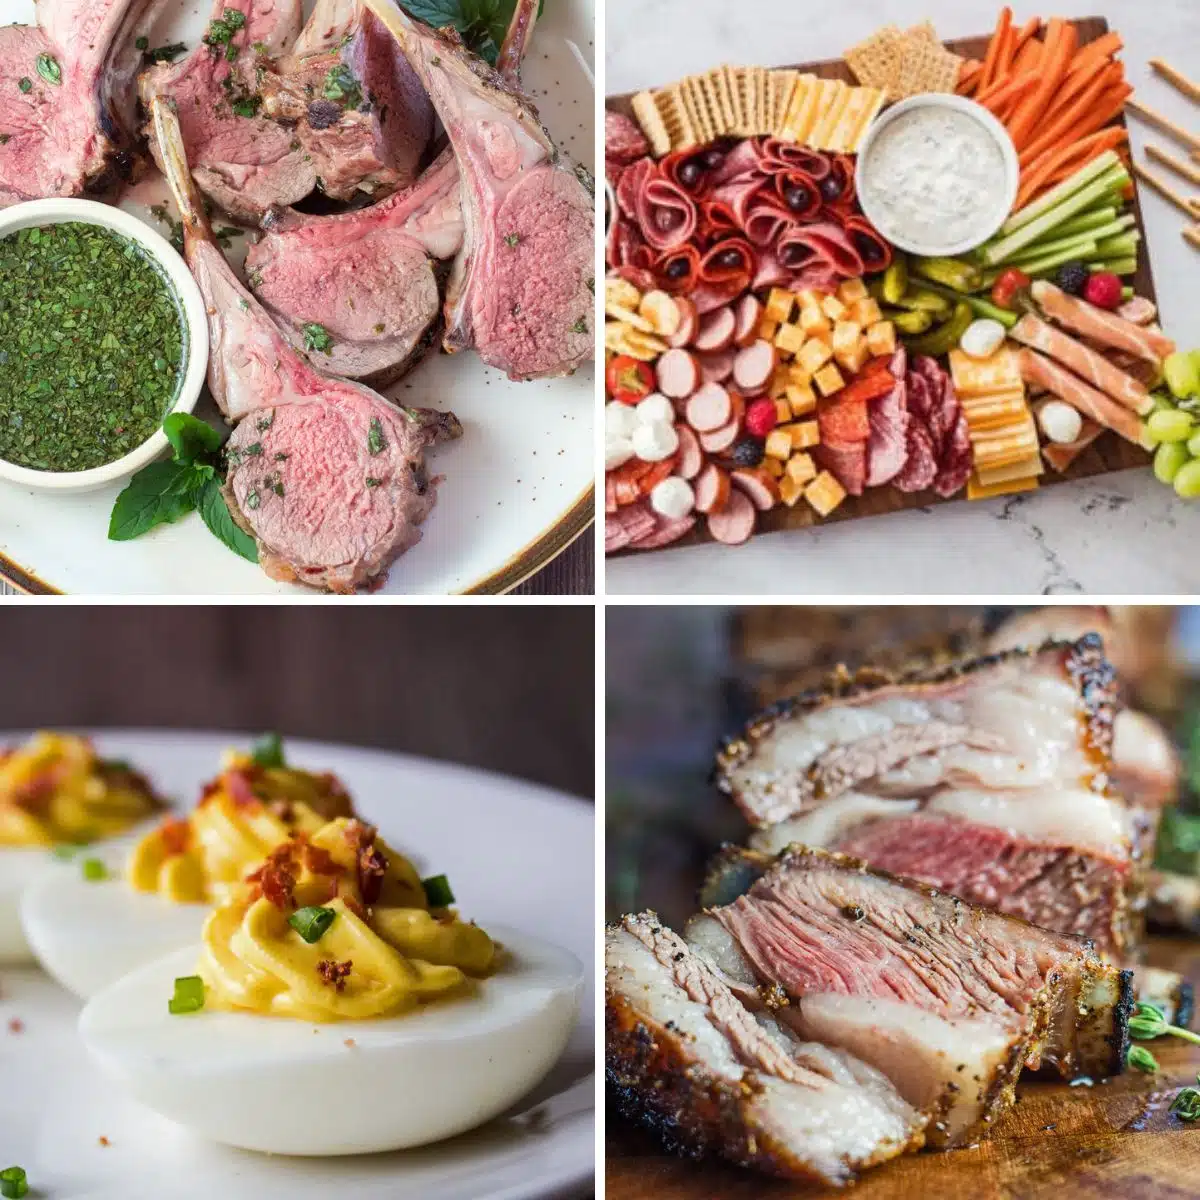 Best Easter lamb dinner menu ideas to make a perfectly tasty celebration come together starting with traditional deviled eggs and much more.